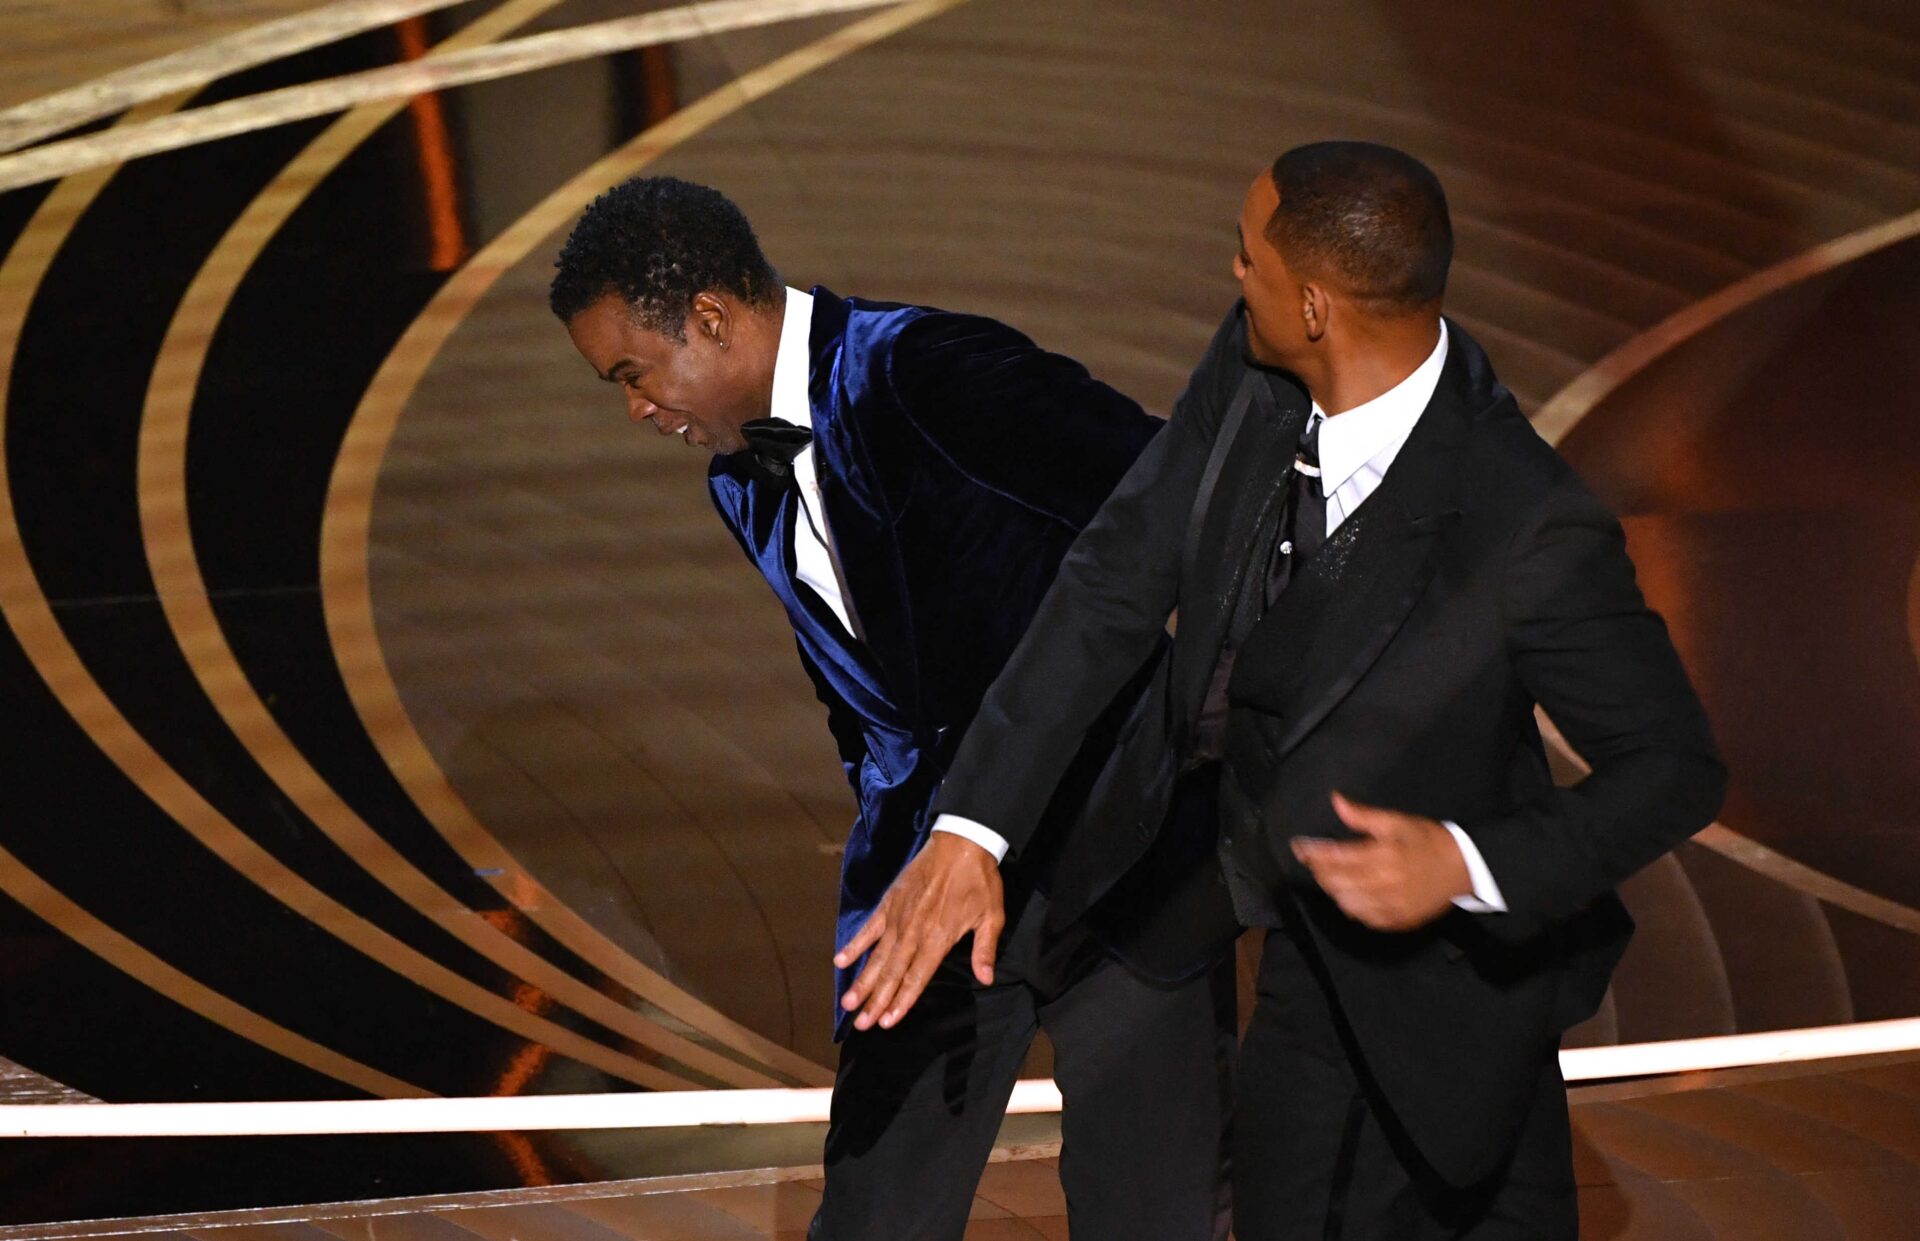 Will Smith resigns from the Academy after slapping Chris Rock Actor Will Smith has resigned from the Academy of Motion Picture Arts and Sciences, which awards the Academy Awards, due to the fact that he slapped actor Chris Rock during the Academy Awards ceremony, on Sunday.  Smith said, in a statement, that he would "resign from the Academy" and added that he "accept all the consequences" of his behavior, and continued: "My actions at the Oscars were shocking, painful and unjustified," according to the BBC.  "The list of people I've hurt is long and includes Chris, his family, many of my dearest friends and loved ones, all in-home audiences and fans," actor Will Smith said.  Last Wednesday, the Academy of Motion Picture Arts and Sciences announced that it had "initiated disciplinary action" against Smith  The Academy said, in a statement, that "Smith was asked to leave the party after the incident, but he refused," and described Smith's actions as a "traumatic incident in violation of the standards of conduct."